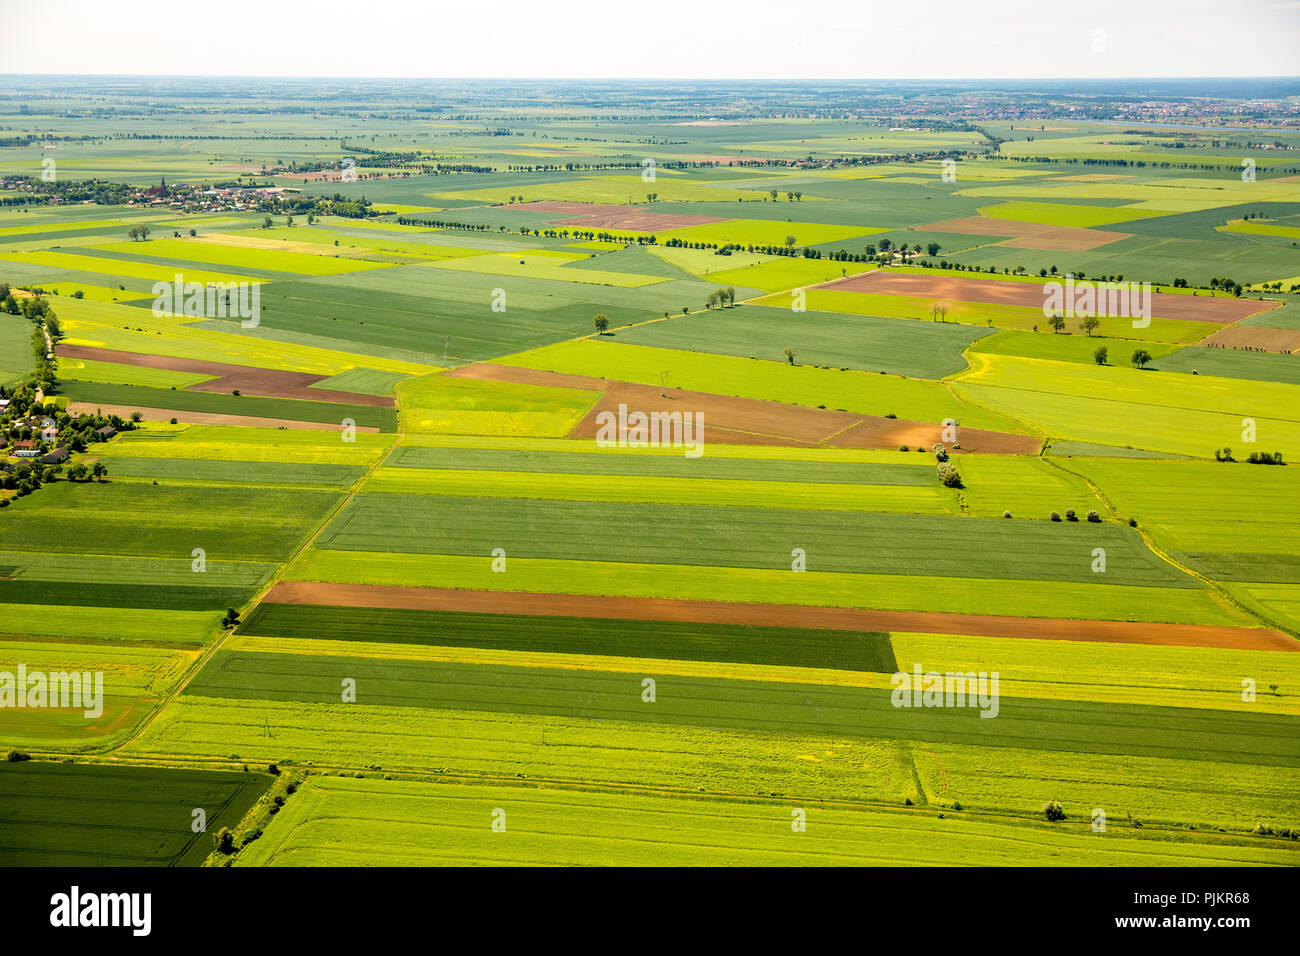 Agriculture, fields east of Gdansk, field pattern, Pregowo Zulawskie, Baltic Sea coast, Pomorskie, Poland Stock Photo